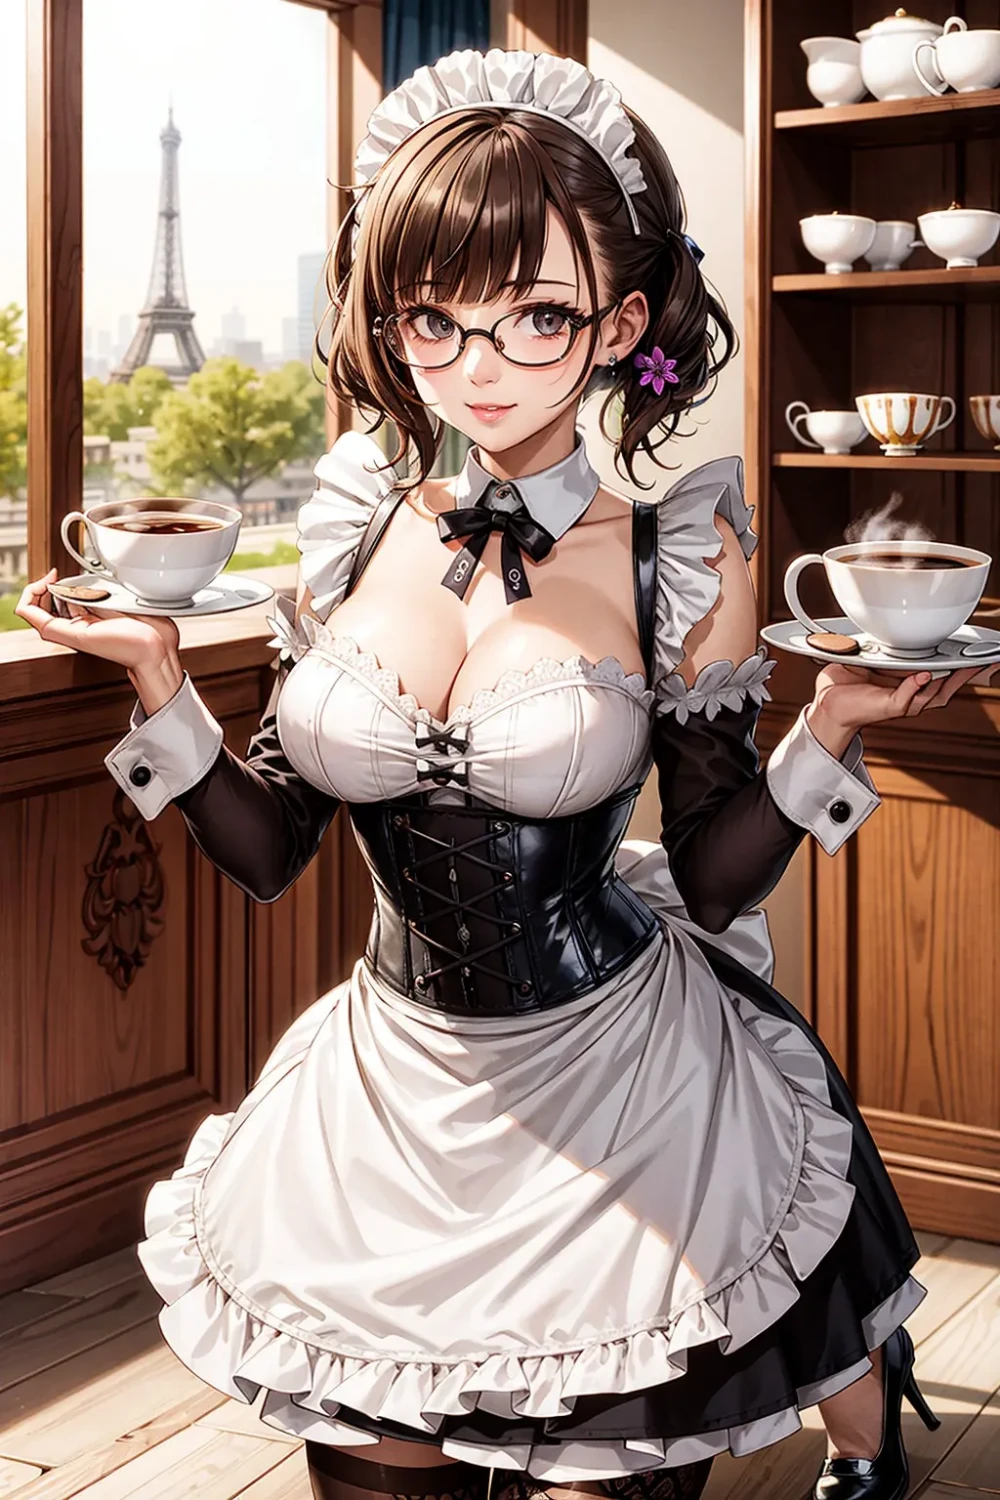 maid-anime-style-all-ages-21